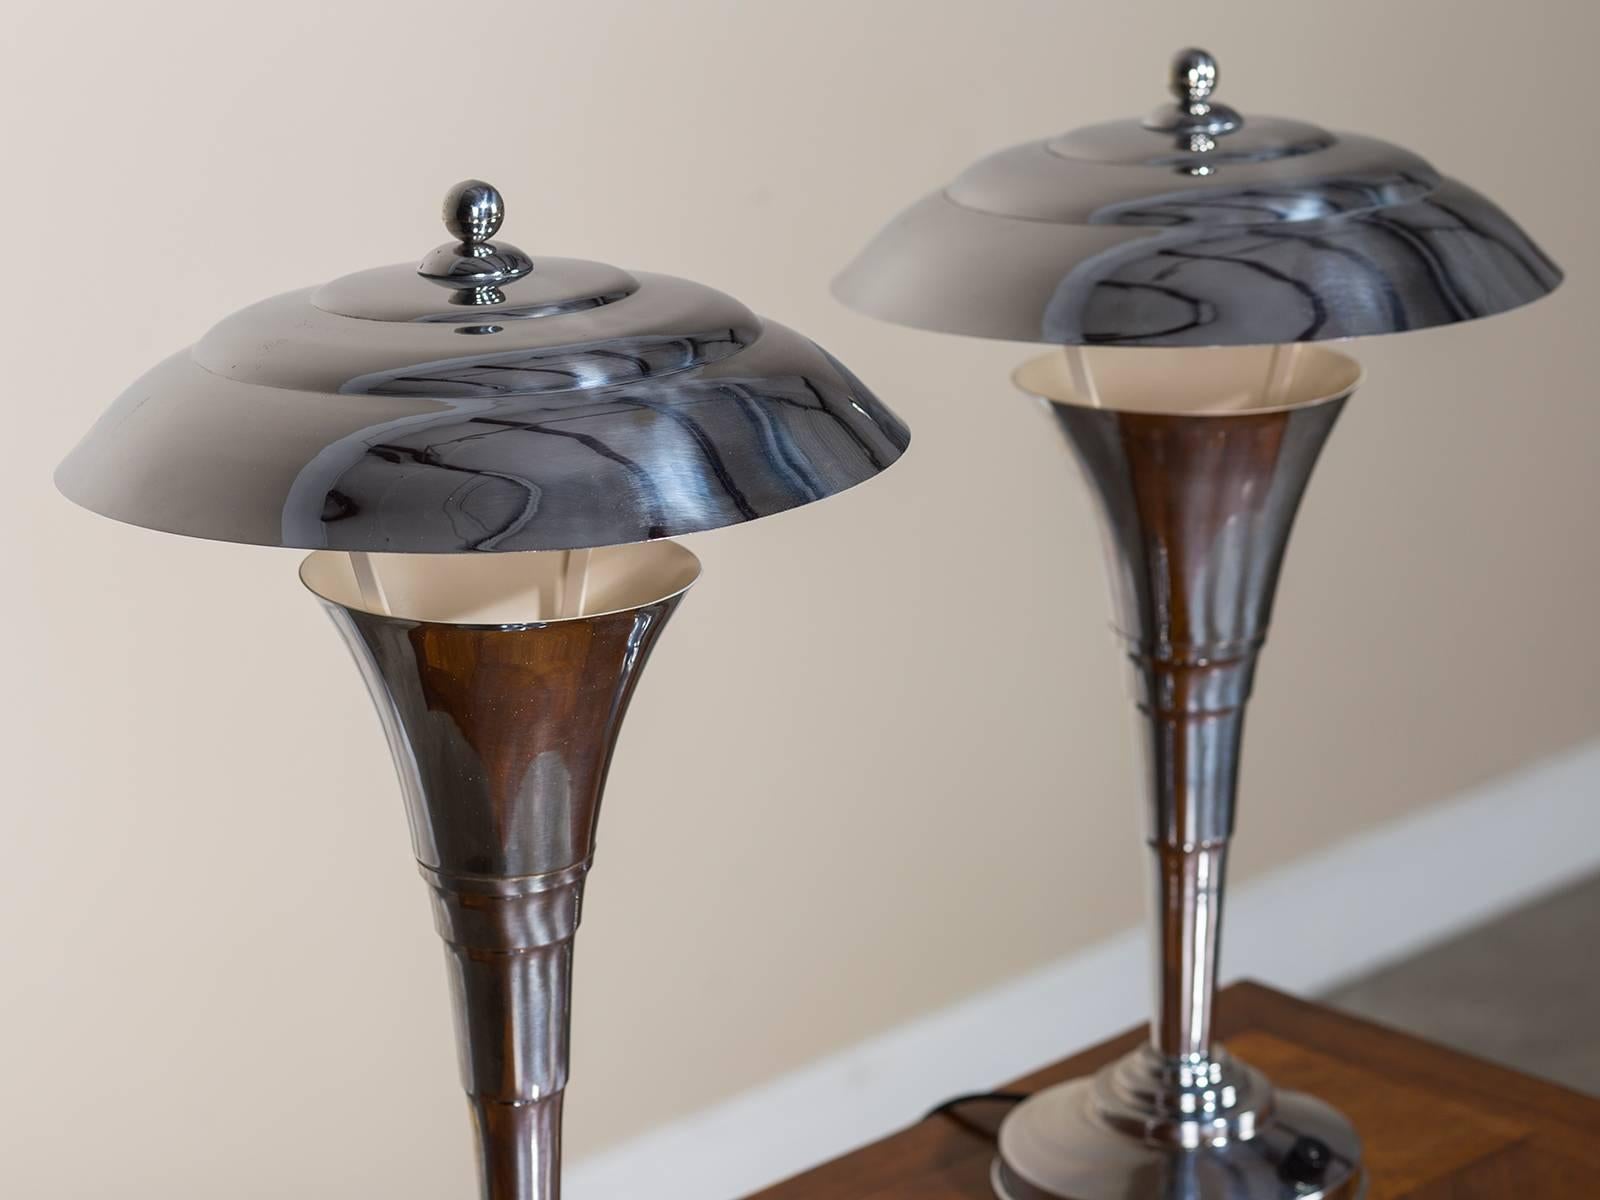 The elegant simplicity of these French Art Deco period chrome table lamps circa 1935 fits the aesthetic developed during the first quarter of the twentieth century when a streamlined effect was desirable in furnishings. Notice how the gentle curve